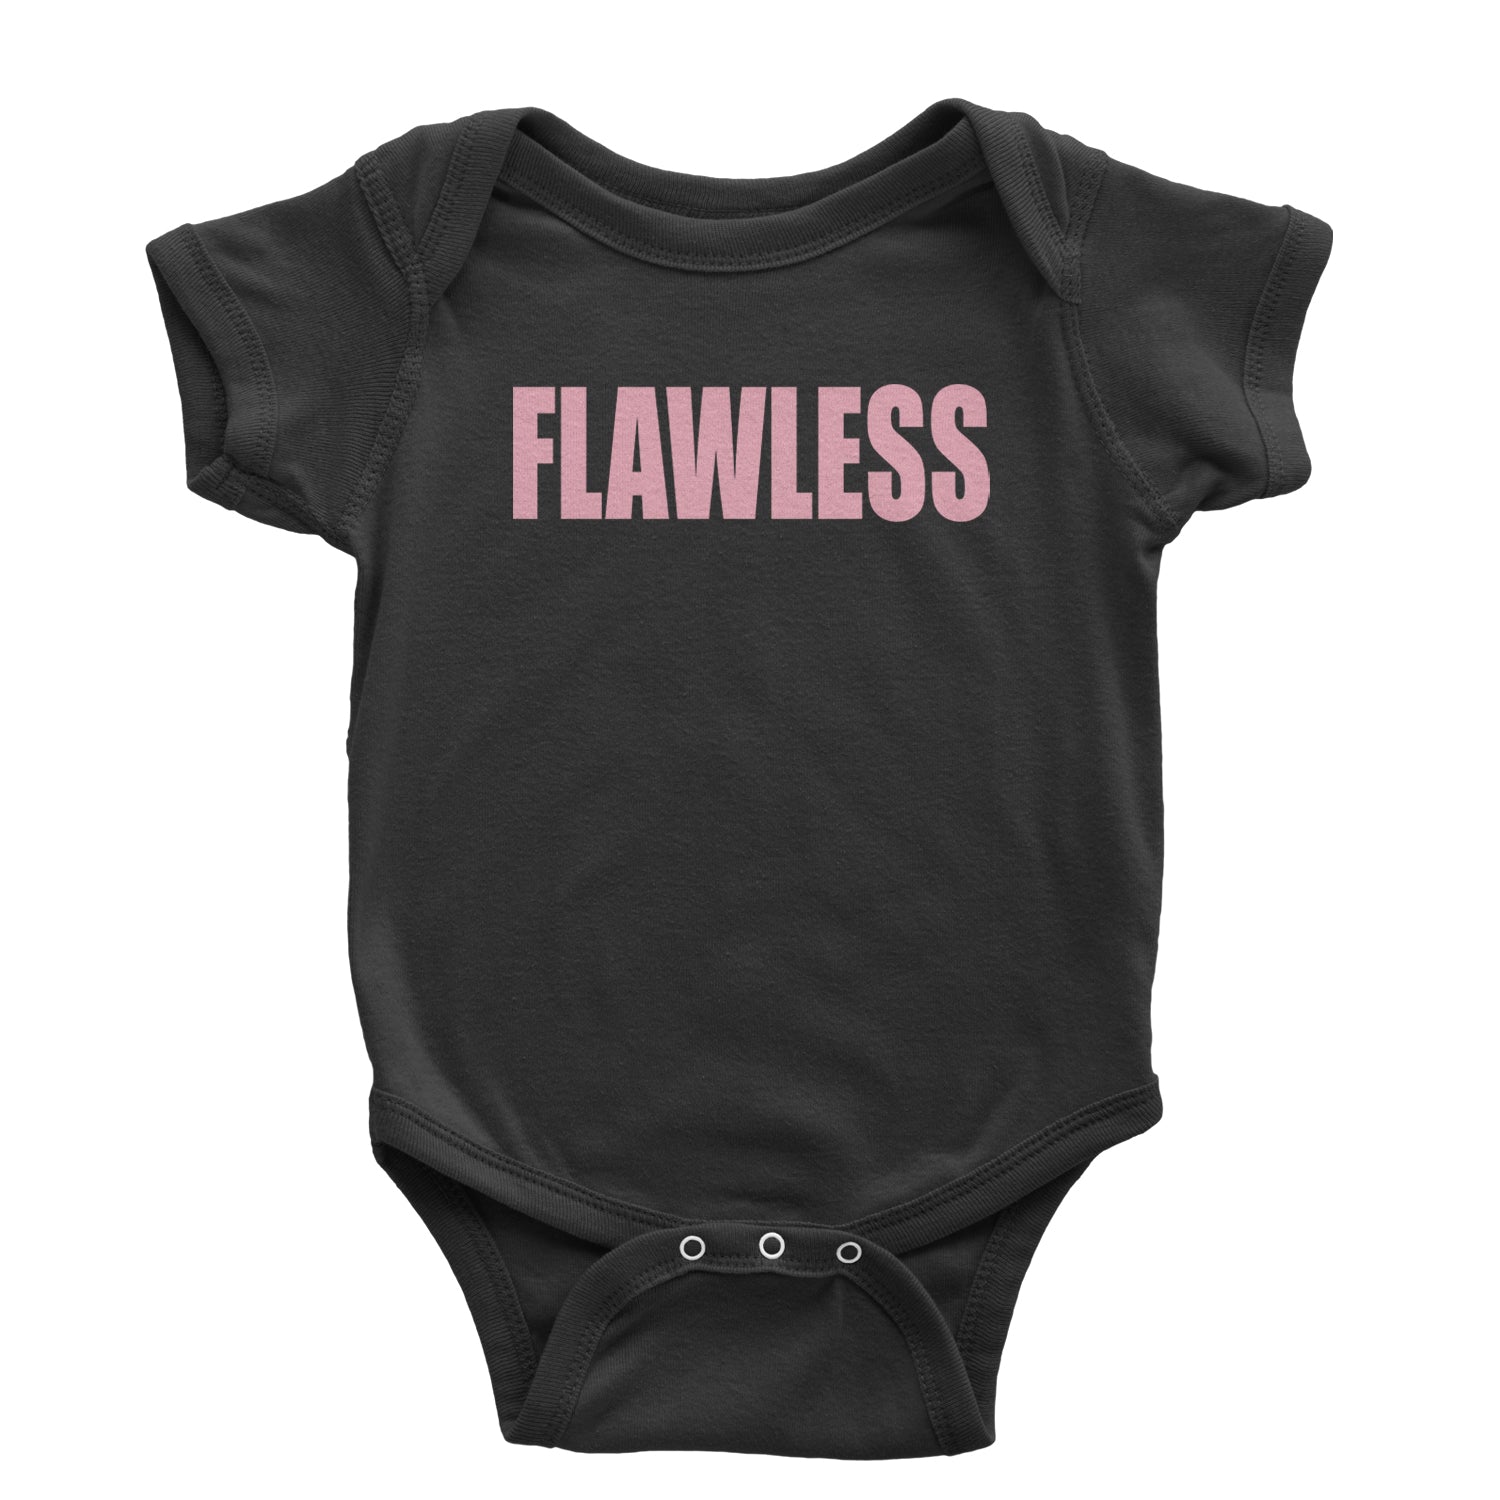 Flawless Renaissance Infant One-Piece Romper Bodysuit and Toddler T-shirt